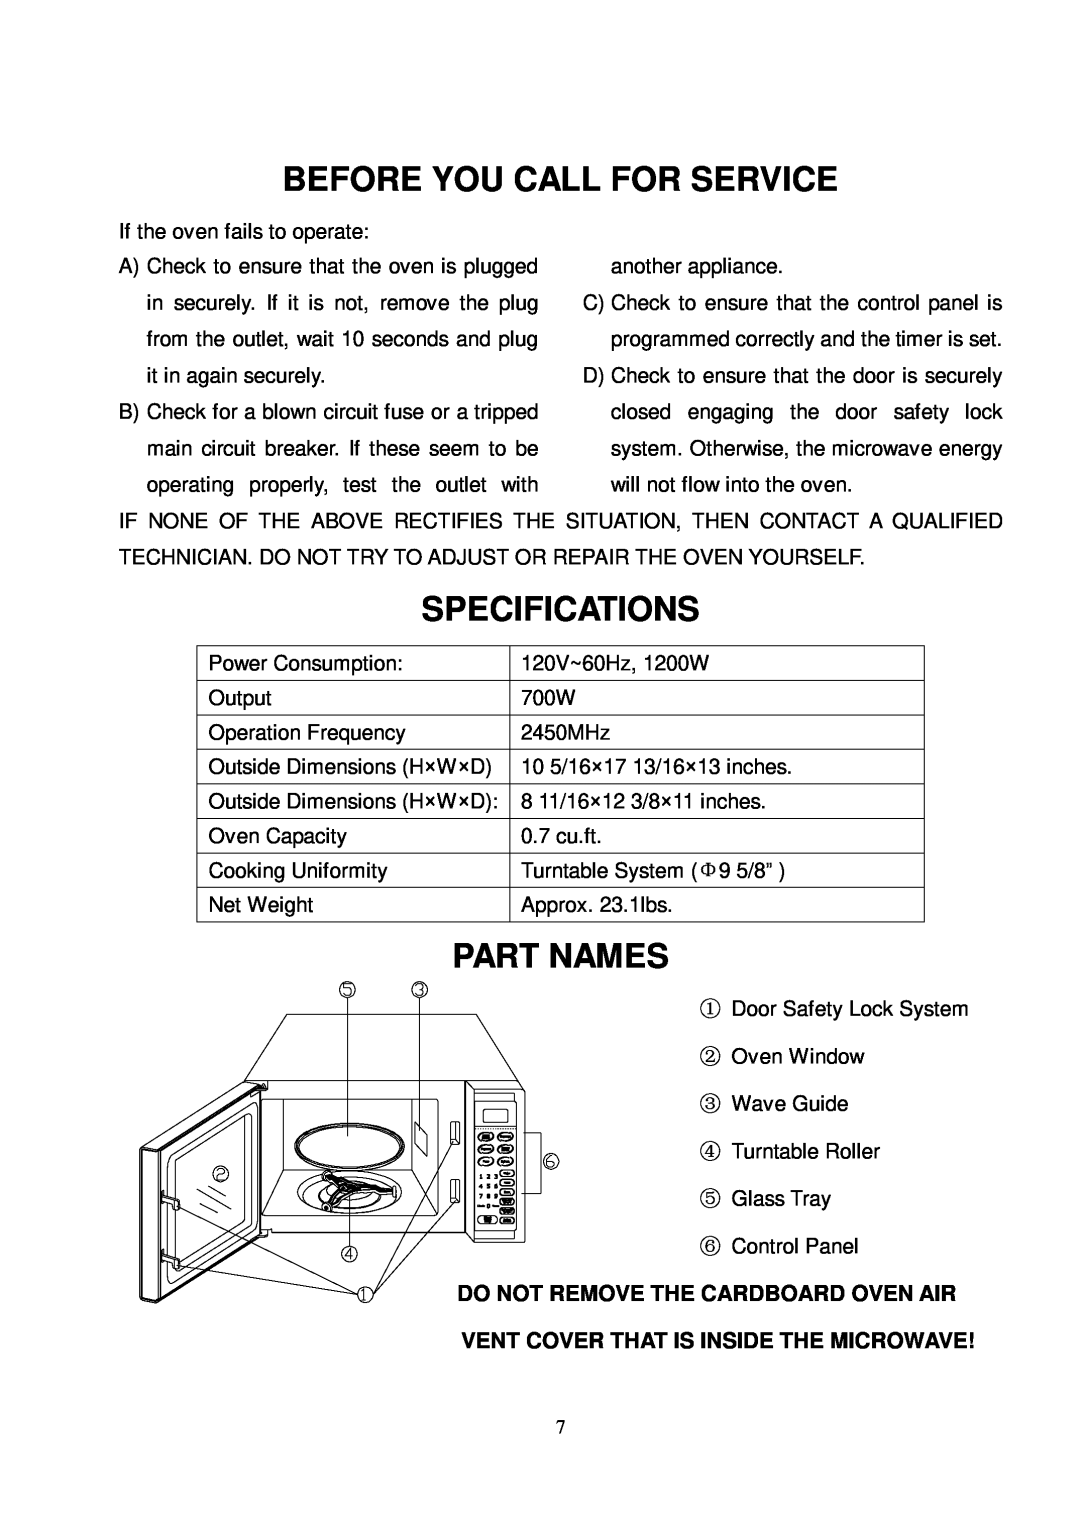 Kenmore 86059 user manual Before You Call For Service, Specifications, Part Names, Do Not Remove The Cardboard Oven Air 